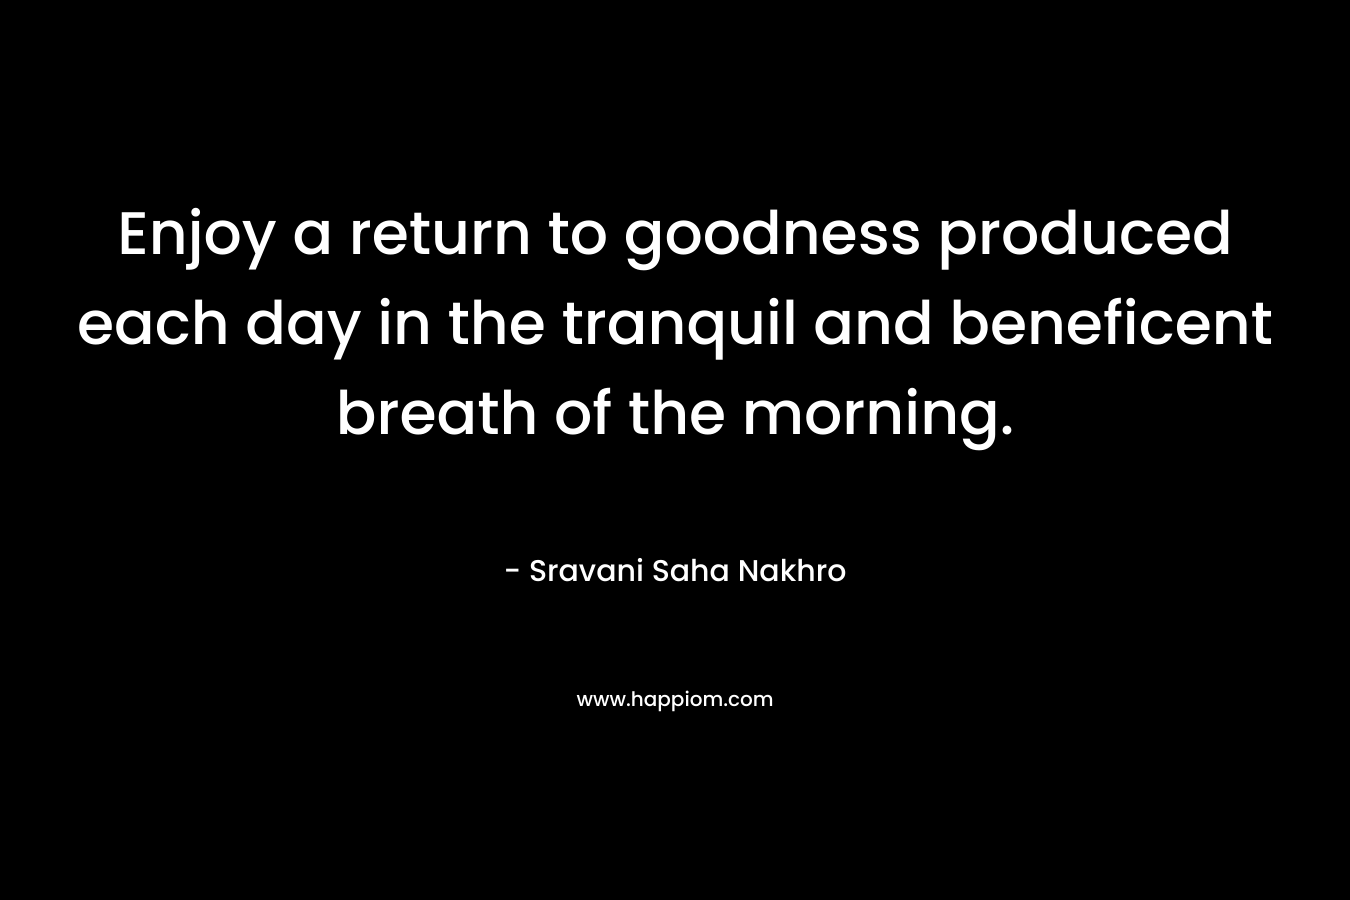 Enjoy a return to goodness produced each day in the tranquil and beneficent breath of the morning.